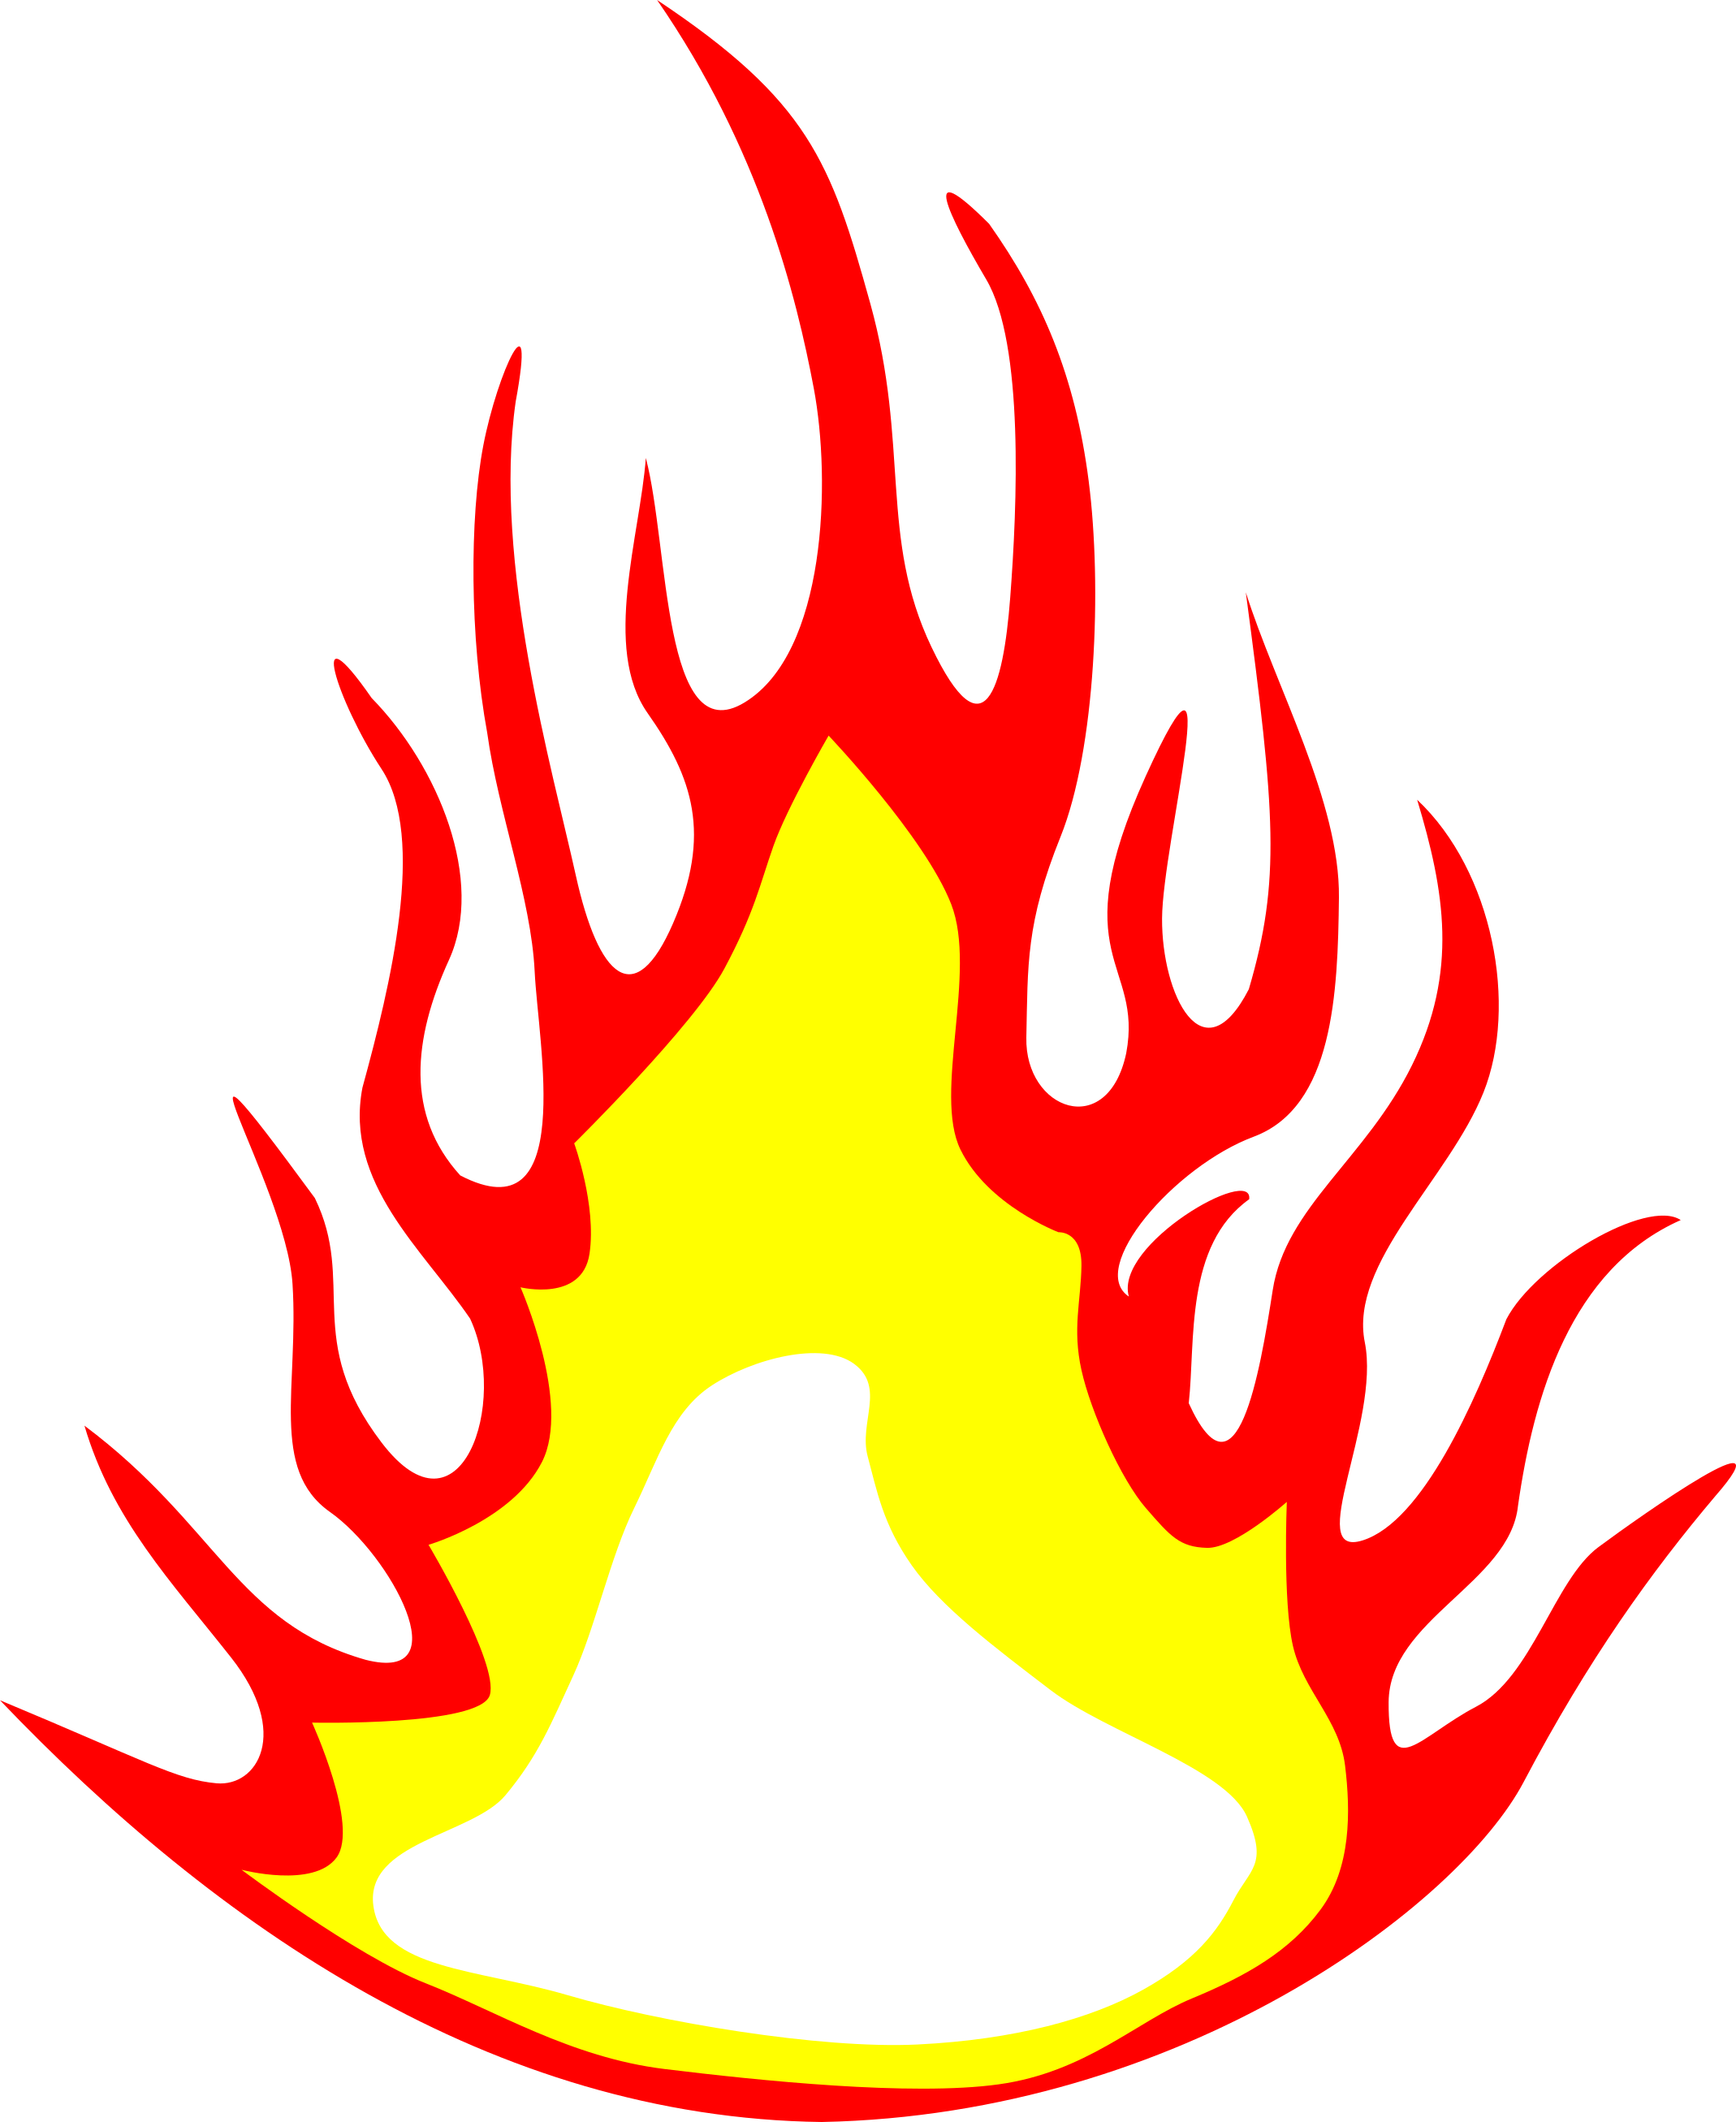 Fire flame clipart.